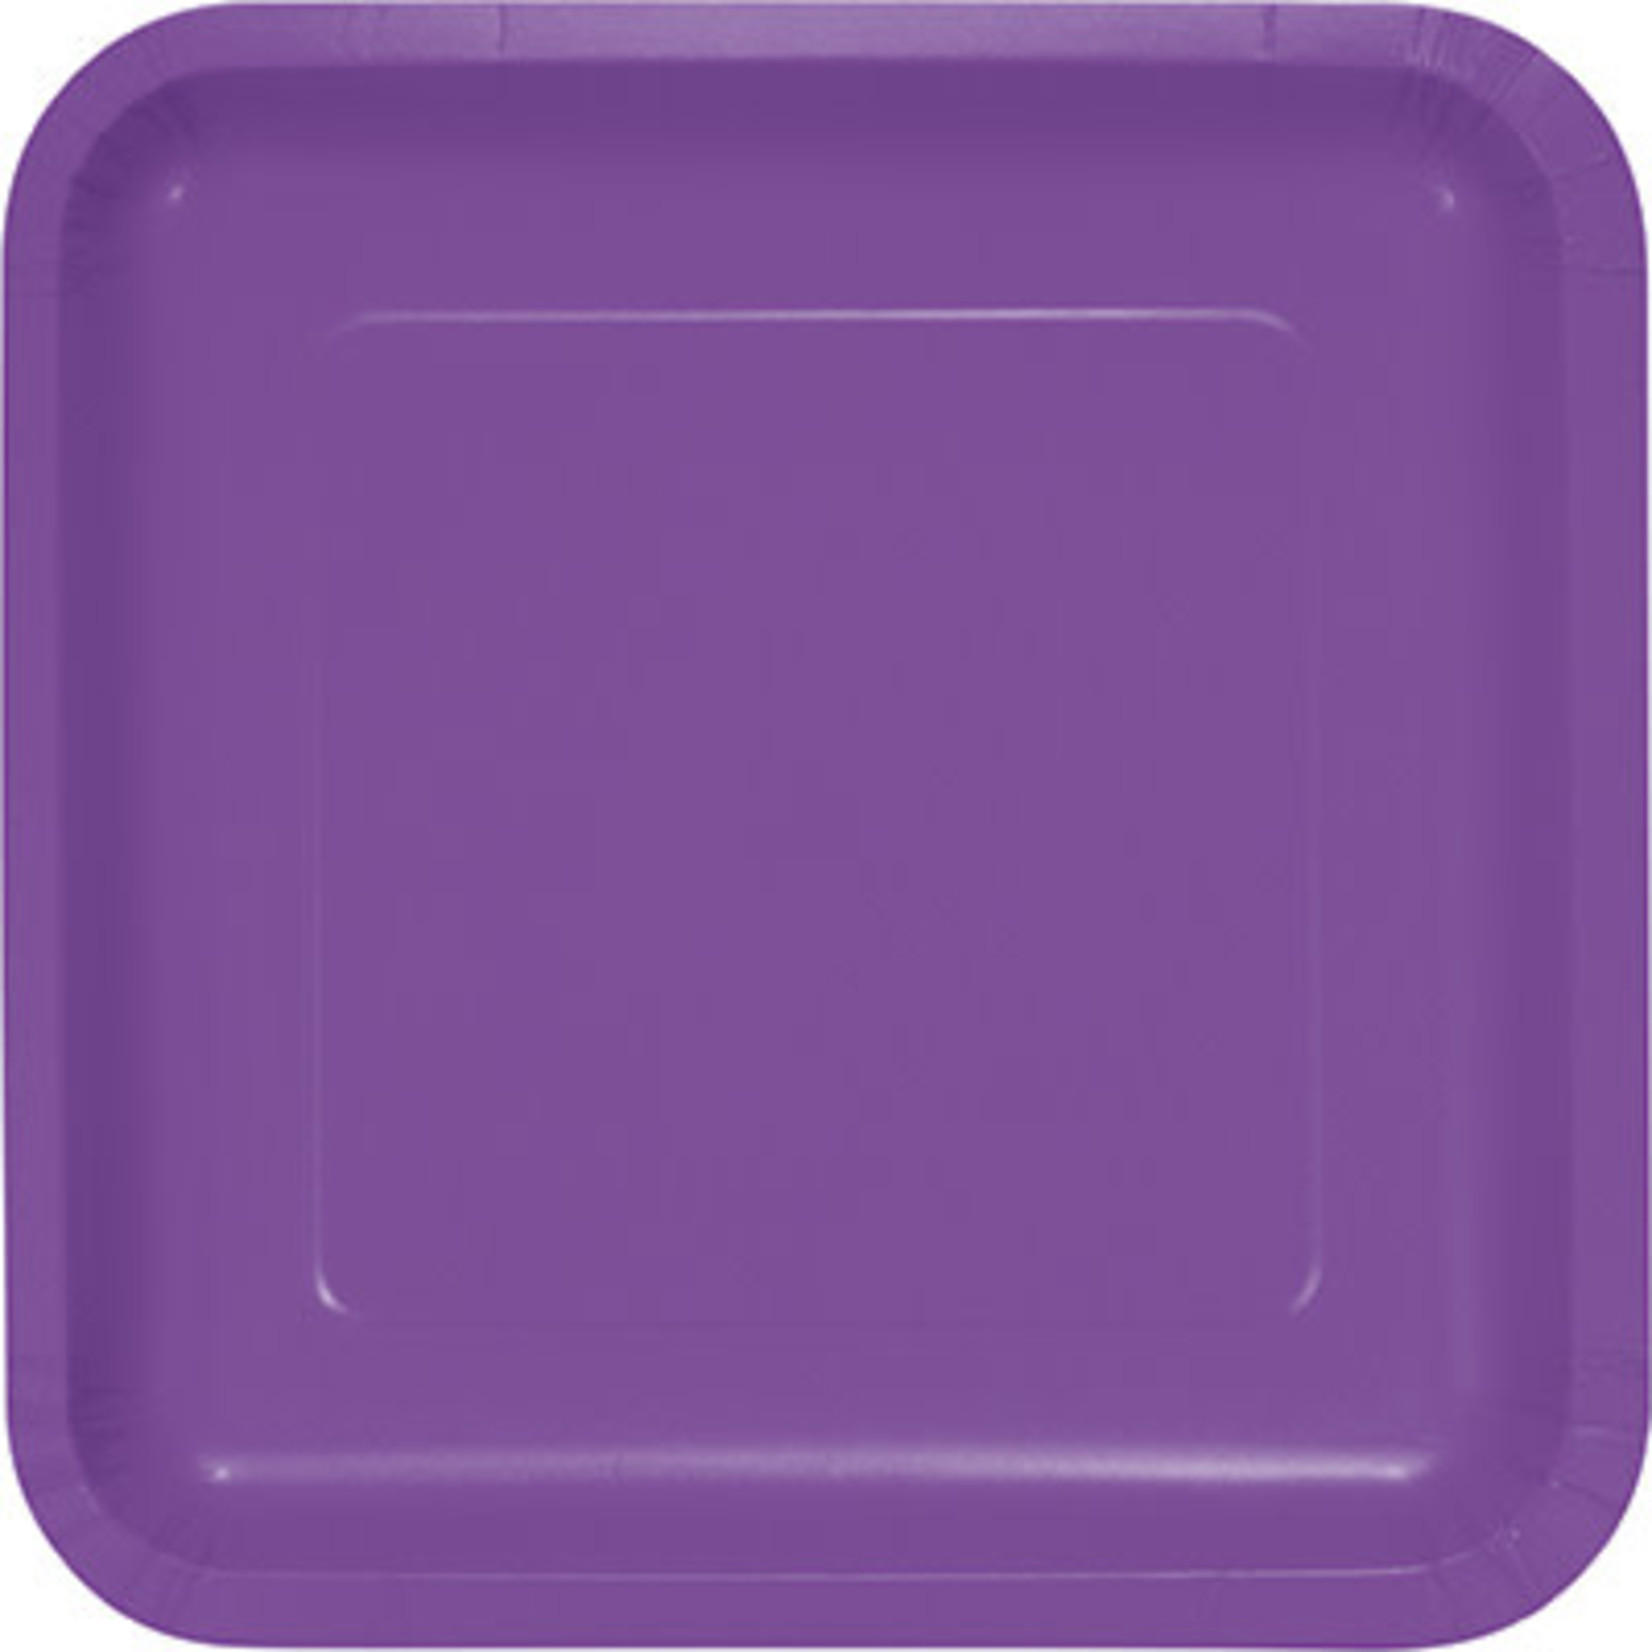 Touch of Color 9" Amethyst Purple Square Paper Plates - 18ct.